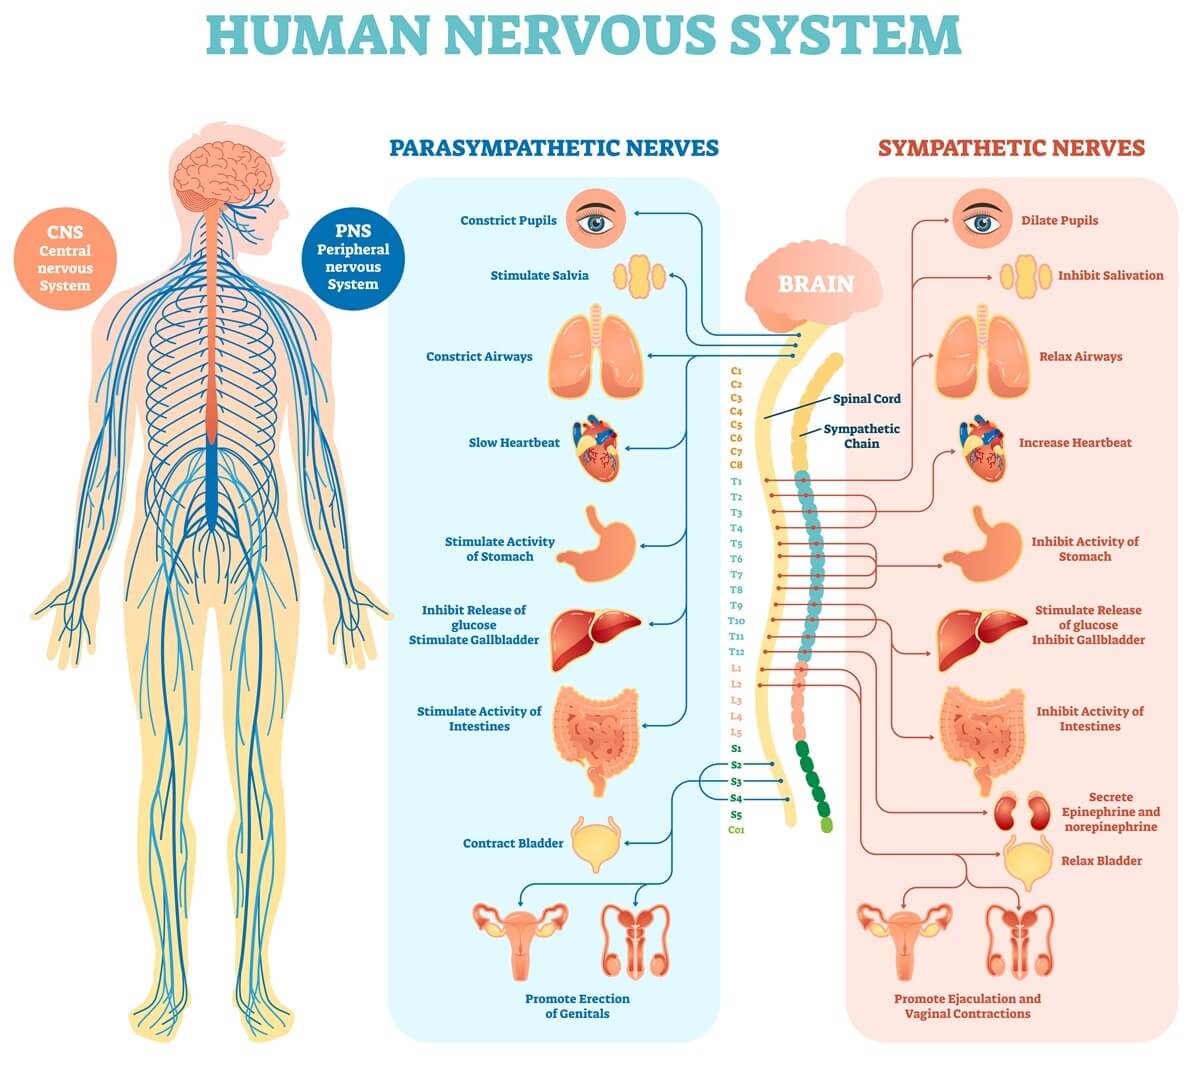 10 Characteristics Of Nervous System - What is the Nervous System?